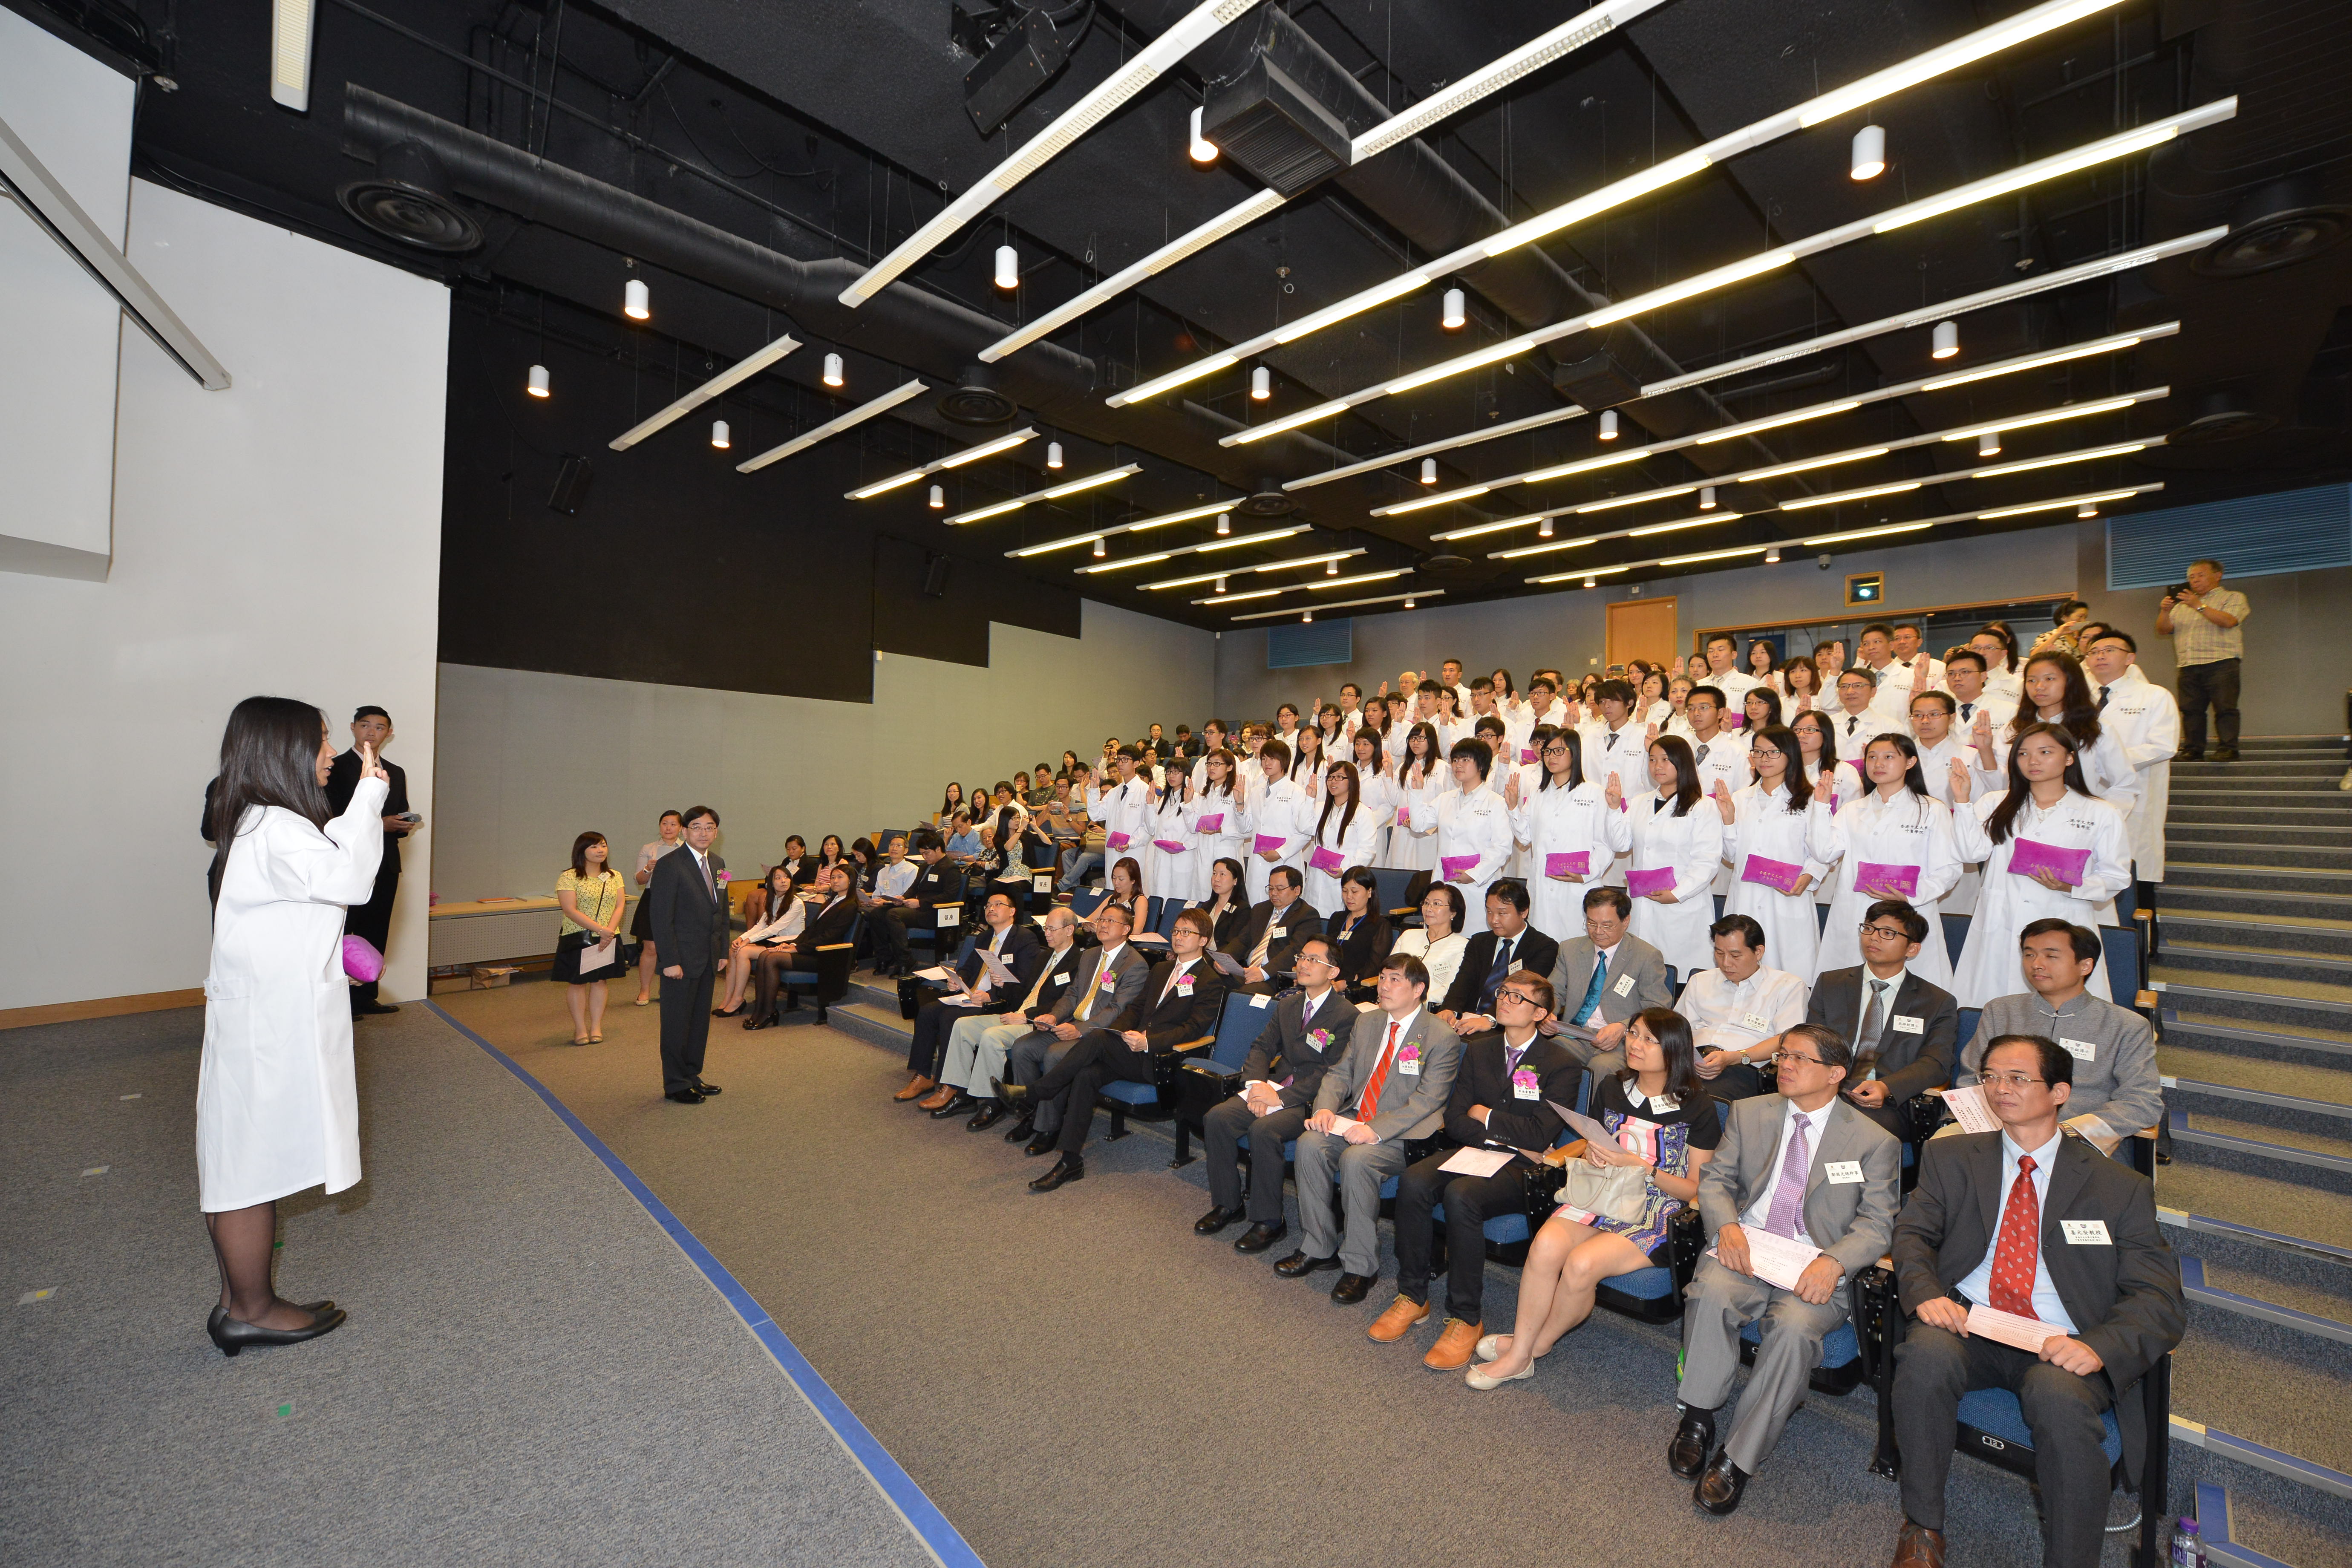 The Chinese medical students take the oath